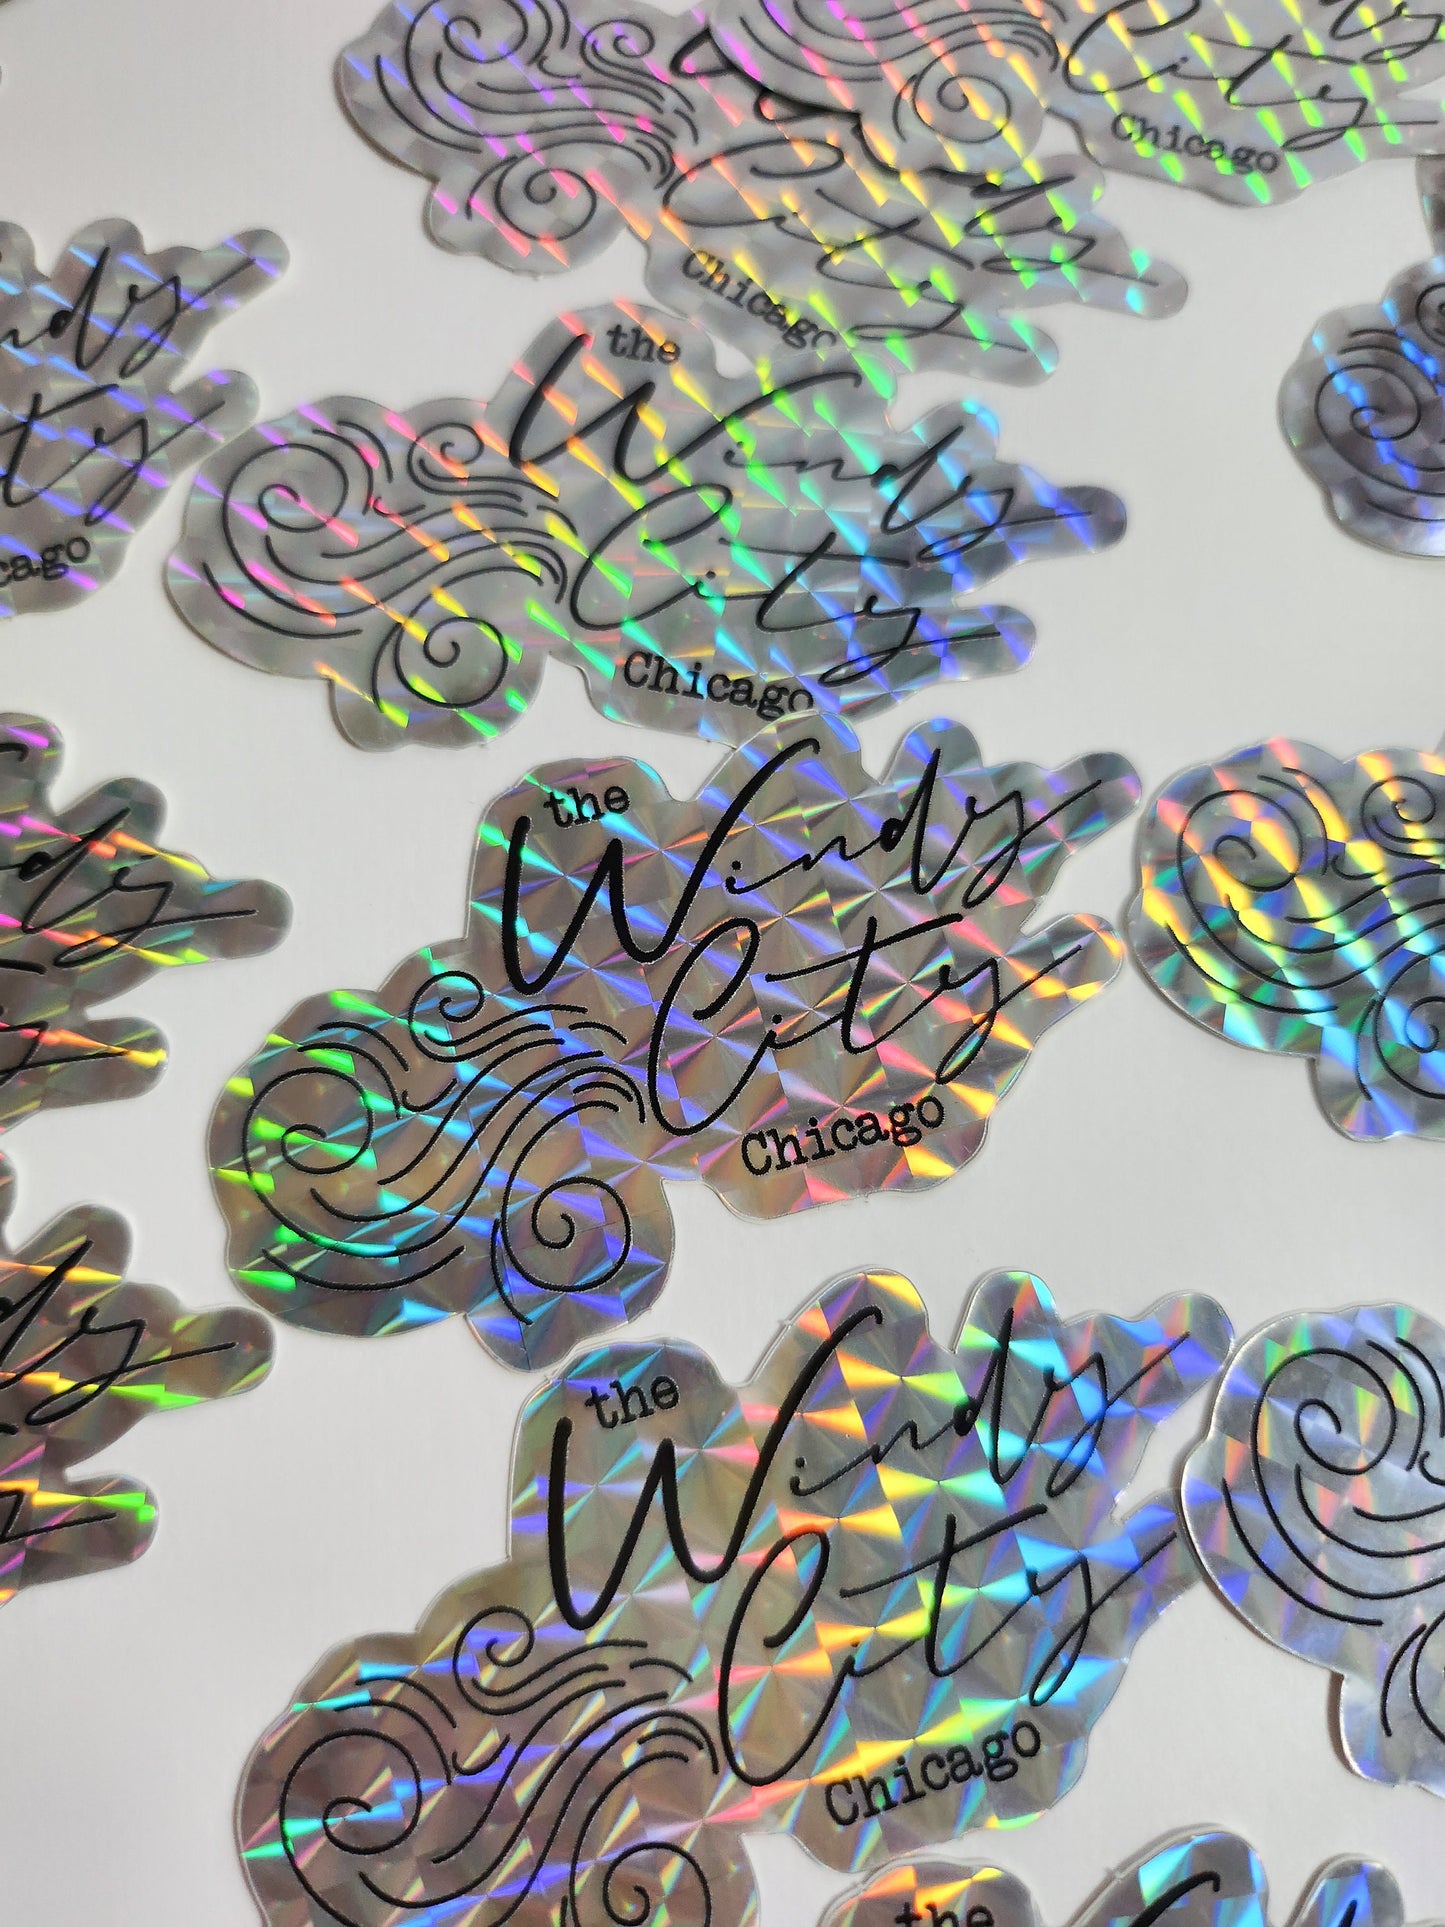 Chicago Windy City Sticker, Holographic, 2.5x1.5in